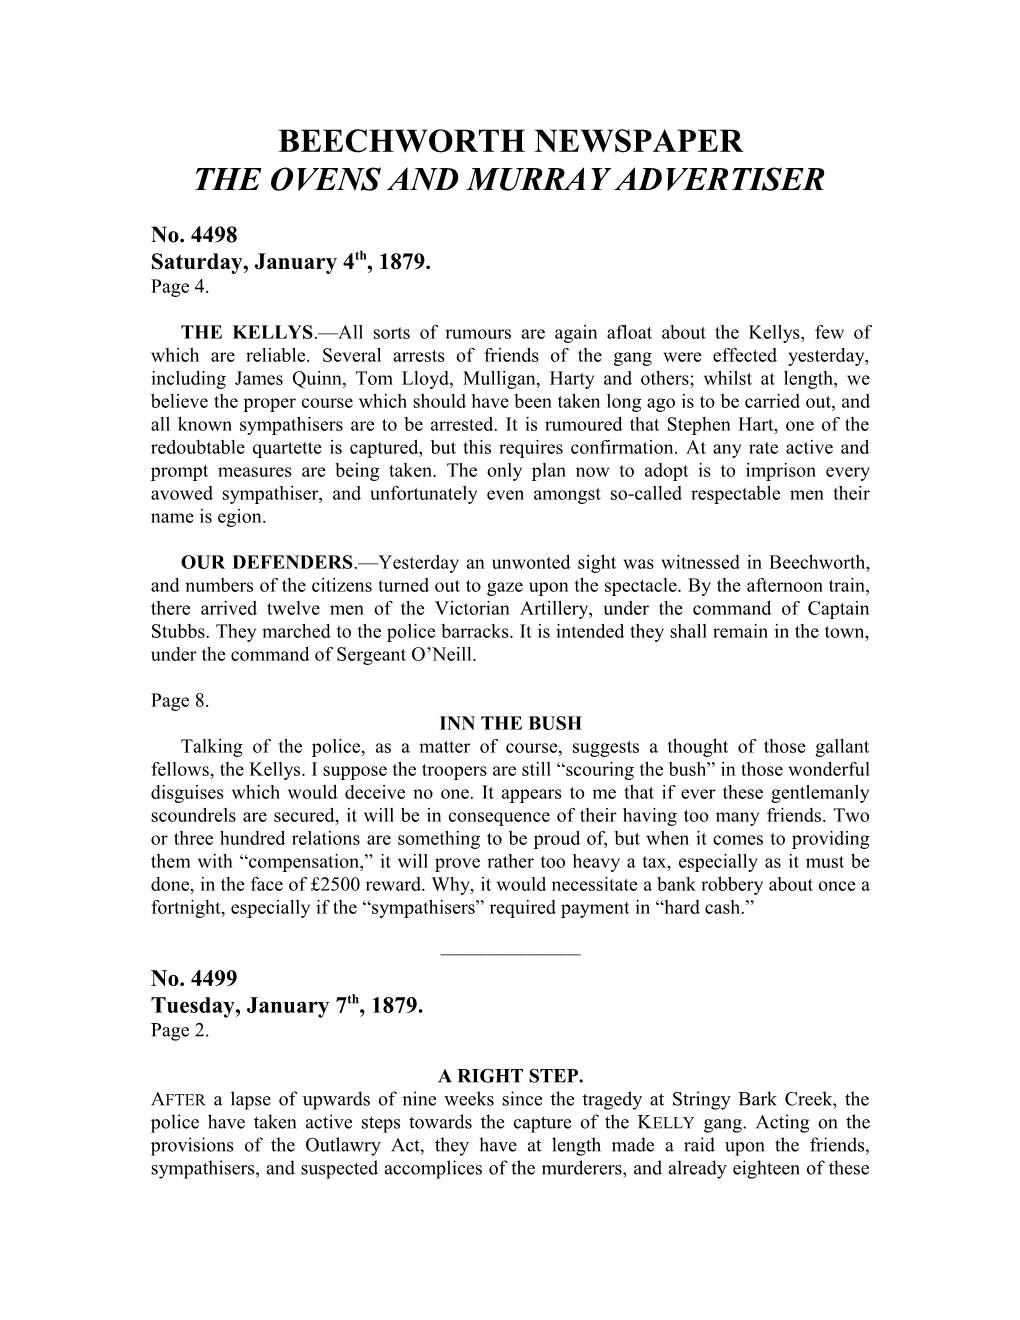 The Ovens and Murray Advertiser